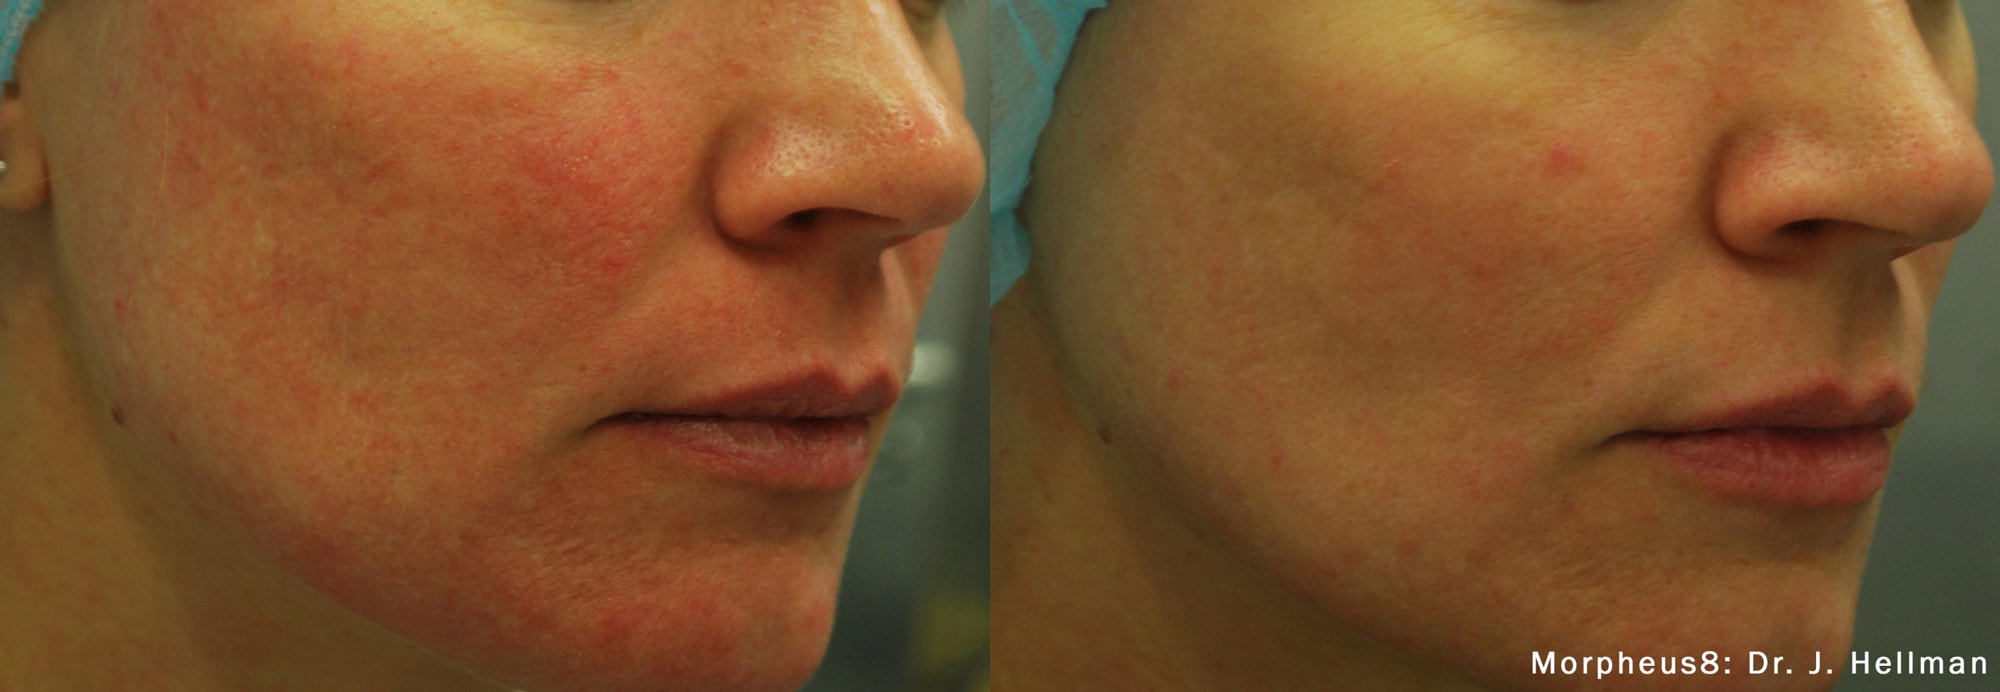 Before and After photos of Morpheus8 treatments reducing an acne outbreak and the improving texture on a woman’s cheek